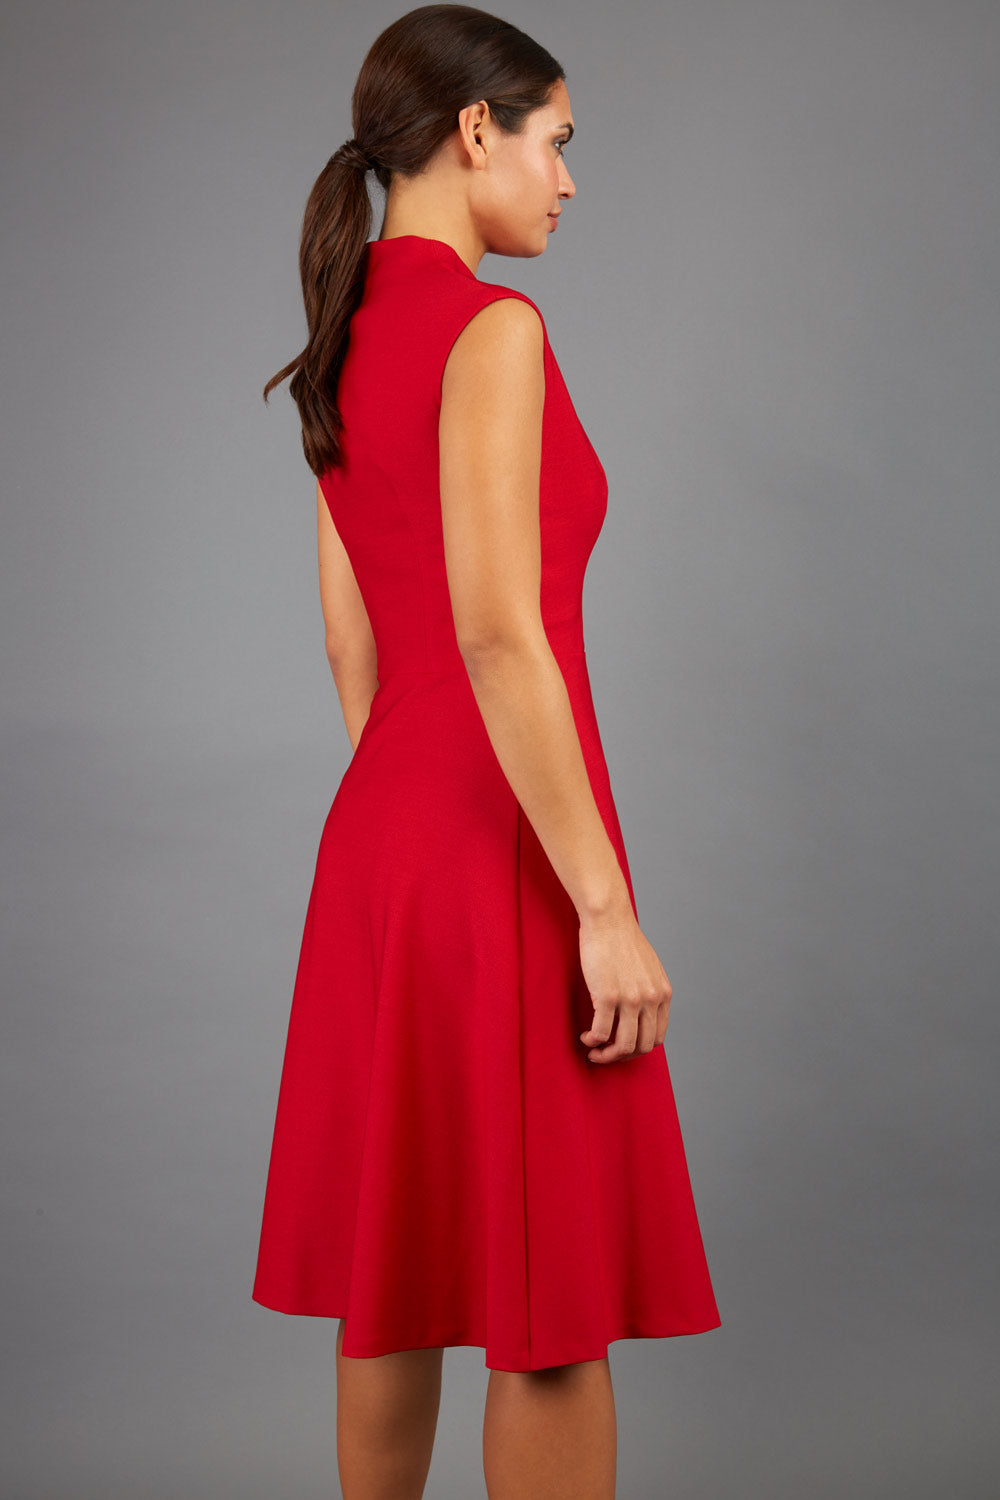 Brunette Model is wearing a sleeveless swing high neck dress with high neck in red by Diva Catwalk back